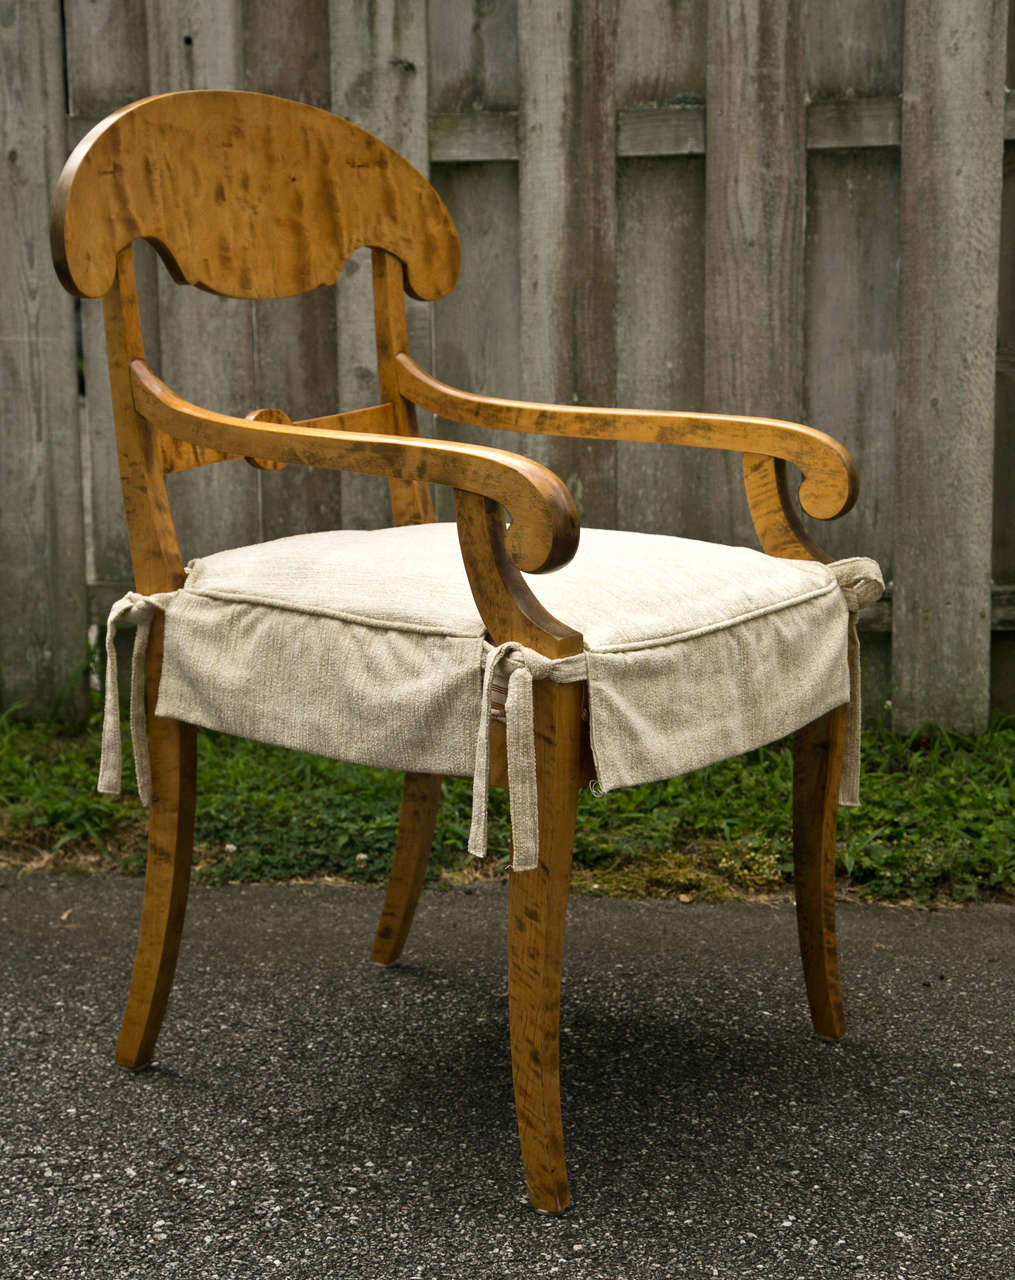 A set of four Biedermeier chairs, two with arms. Solid tiger maple construction and lovely scrolled design.